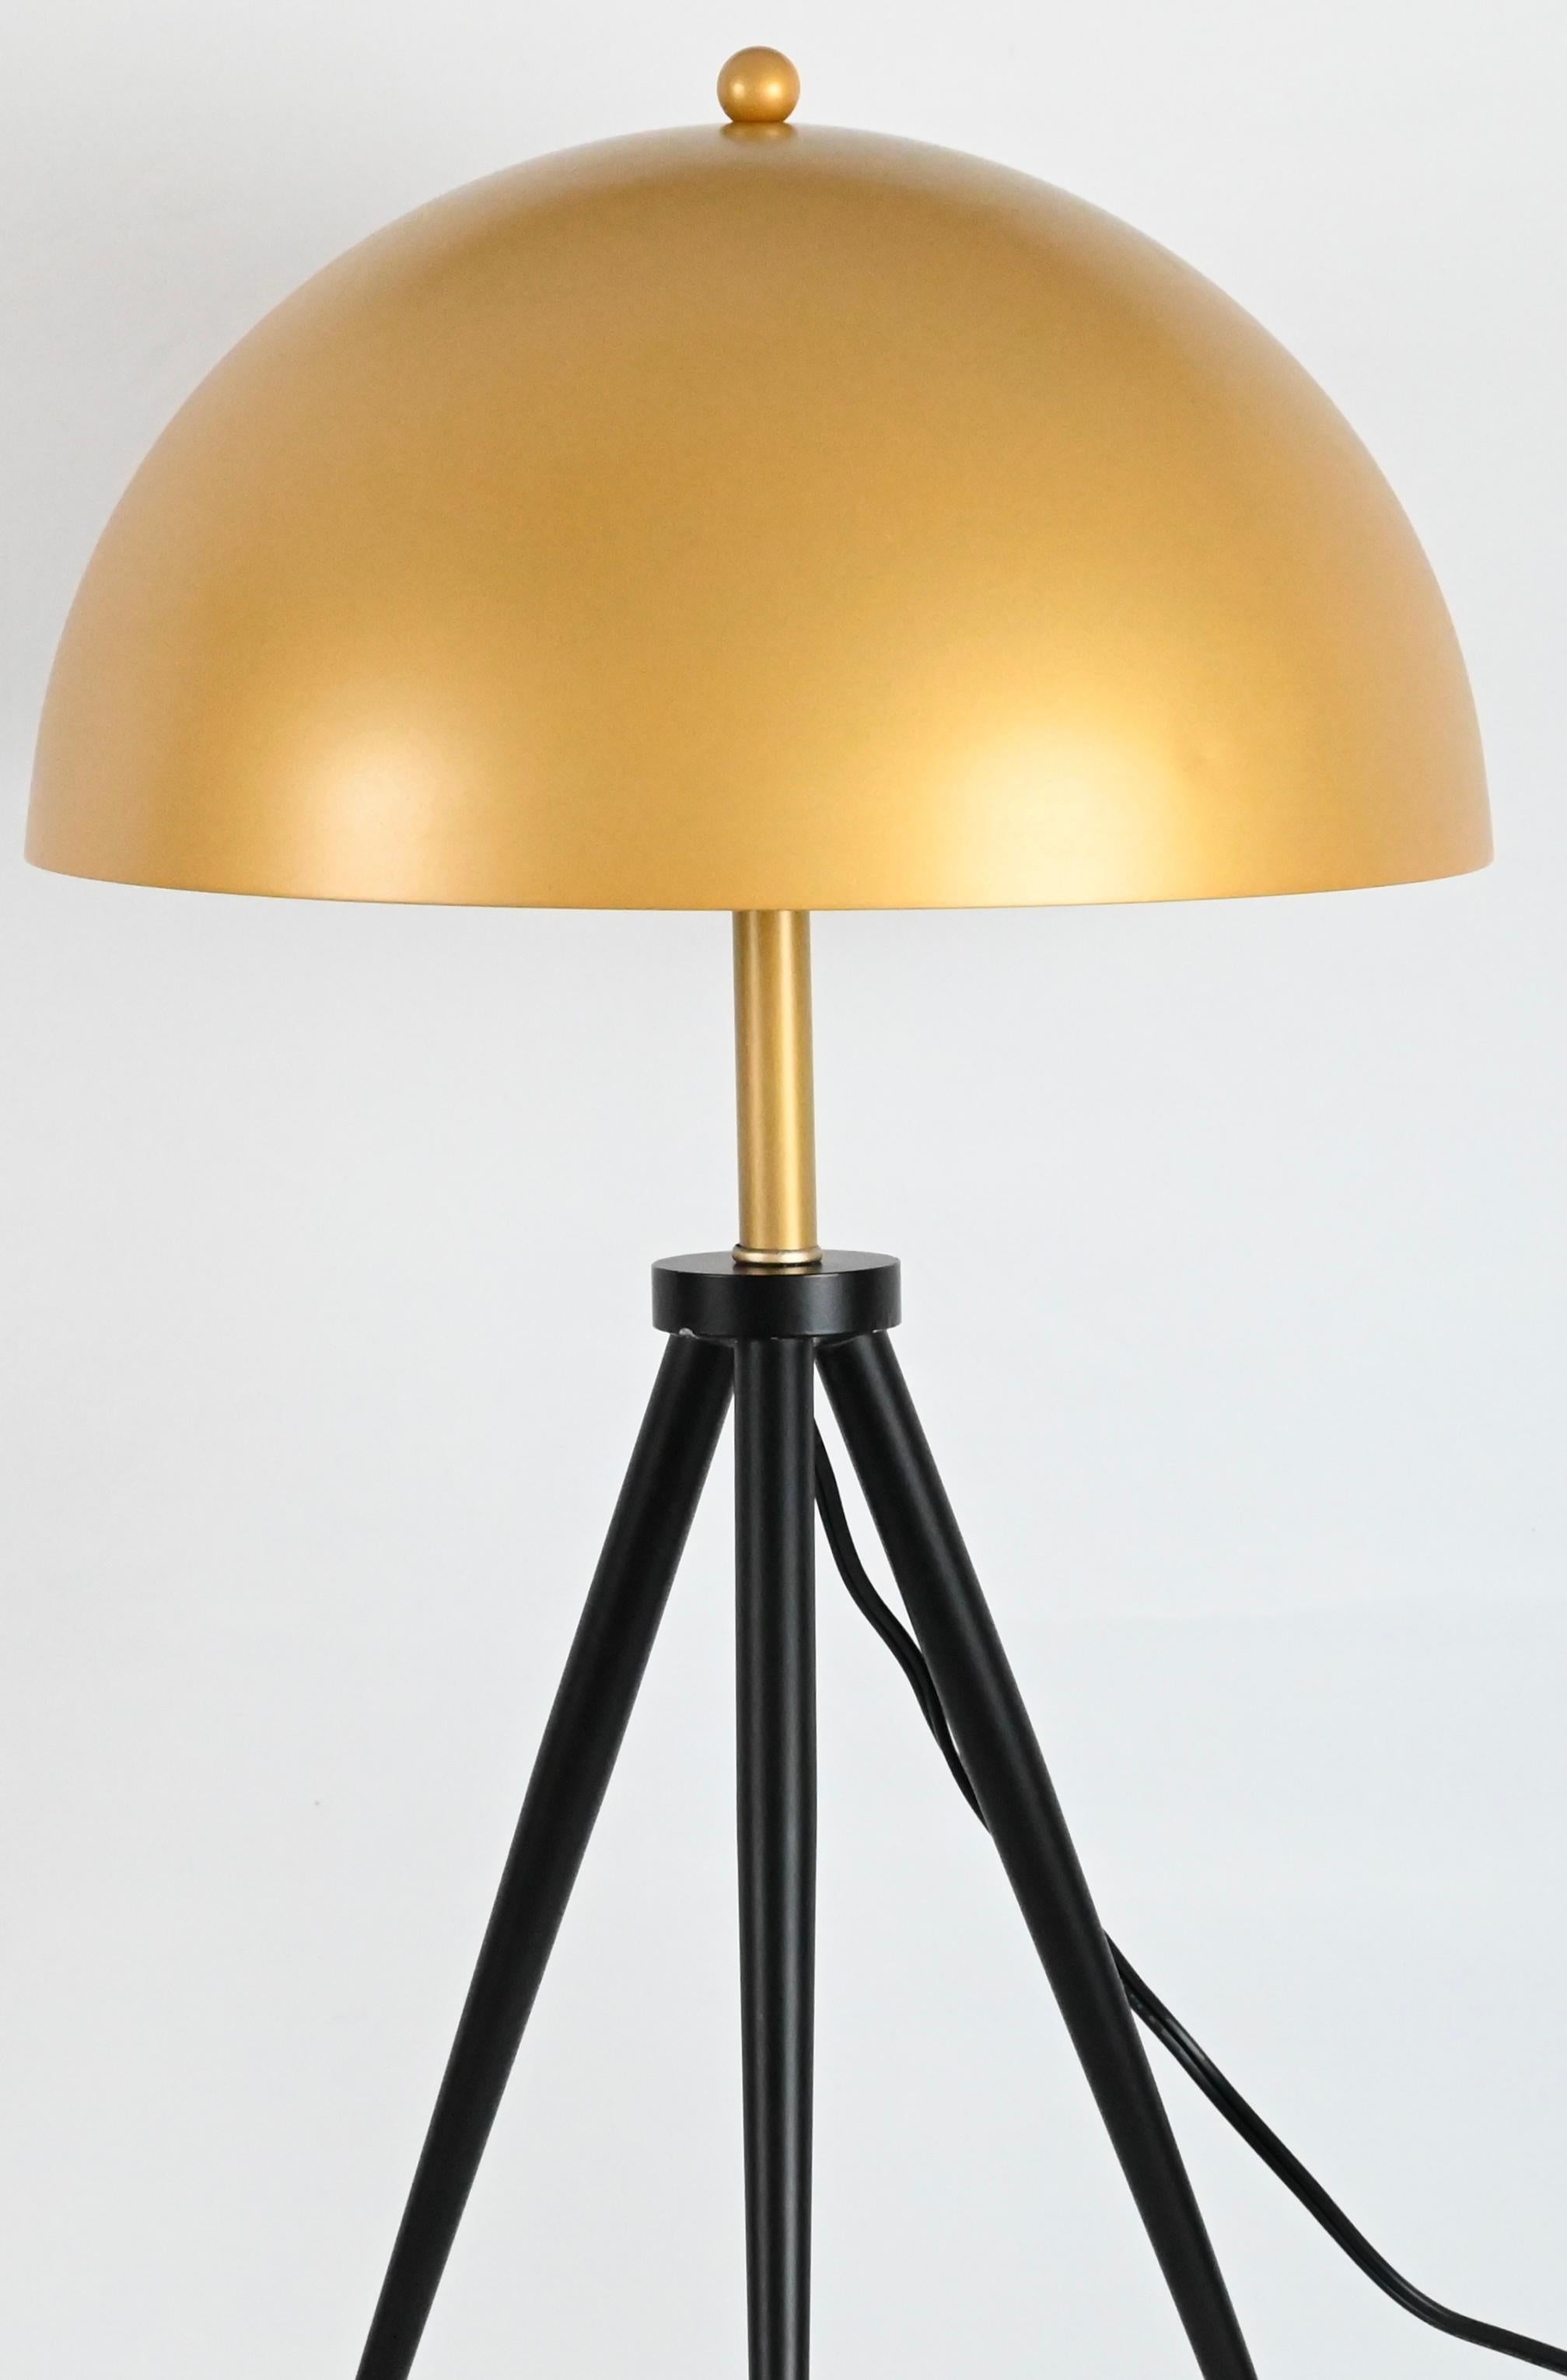 Pair of Tripod Table Lamps In Good Condition For Sale In Miami, FL